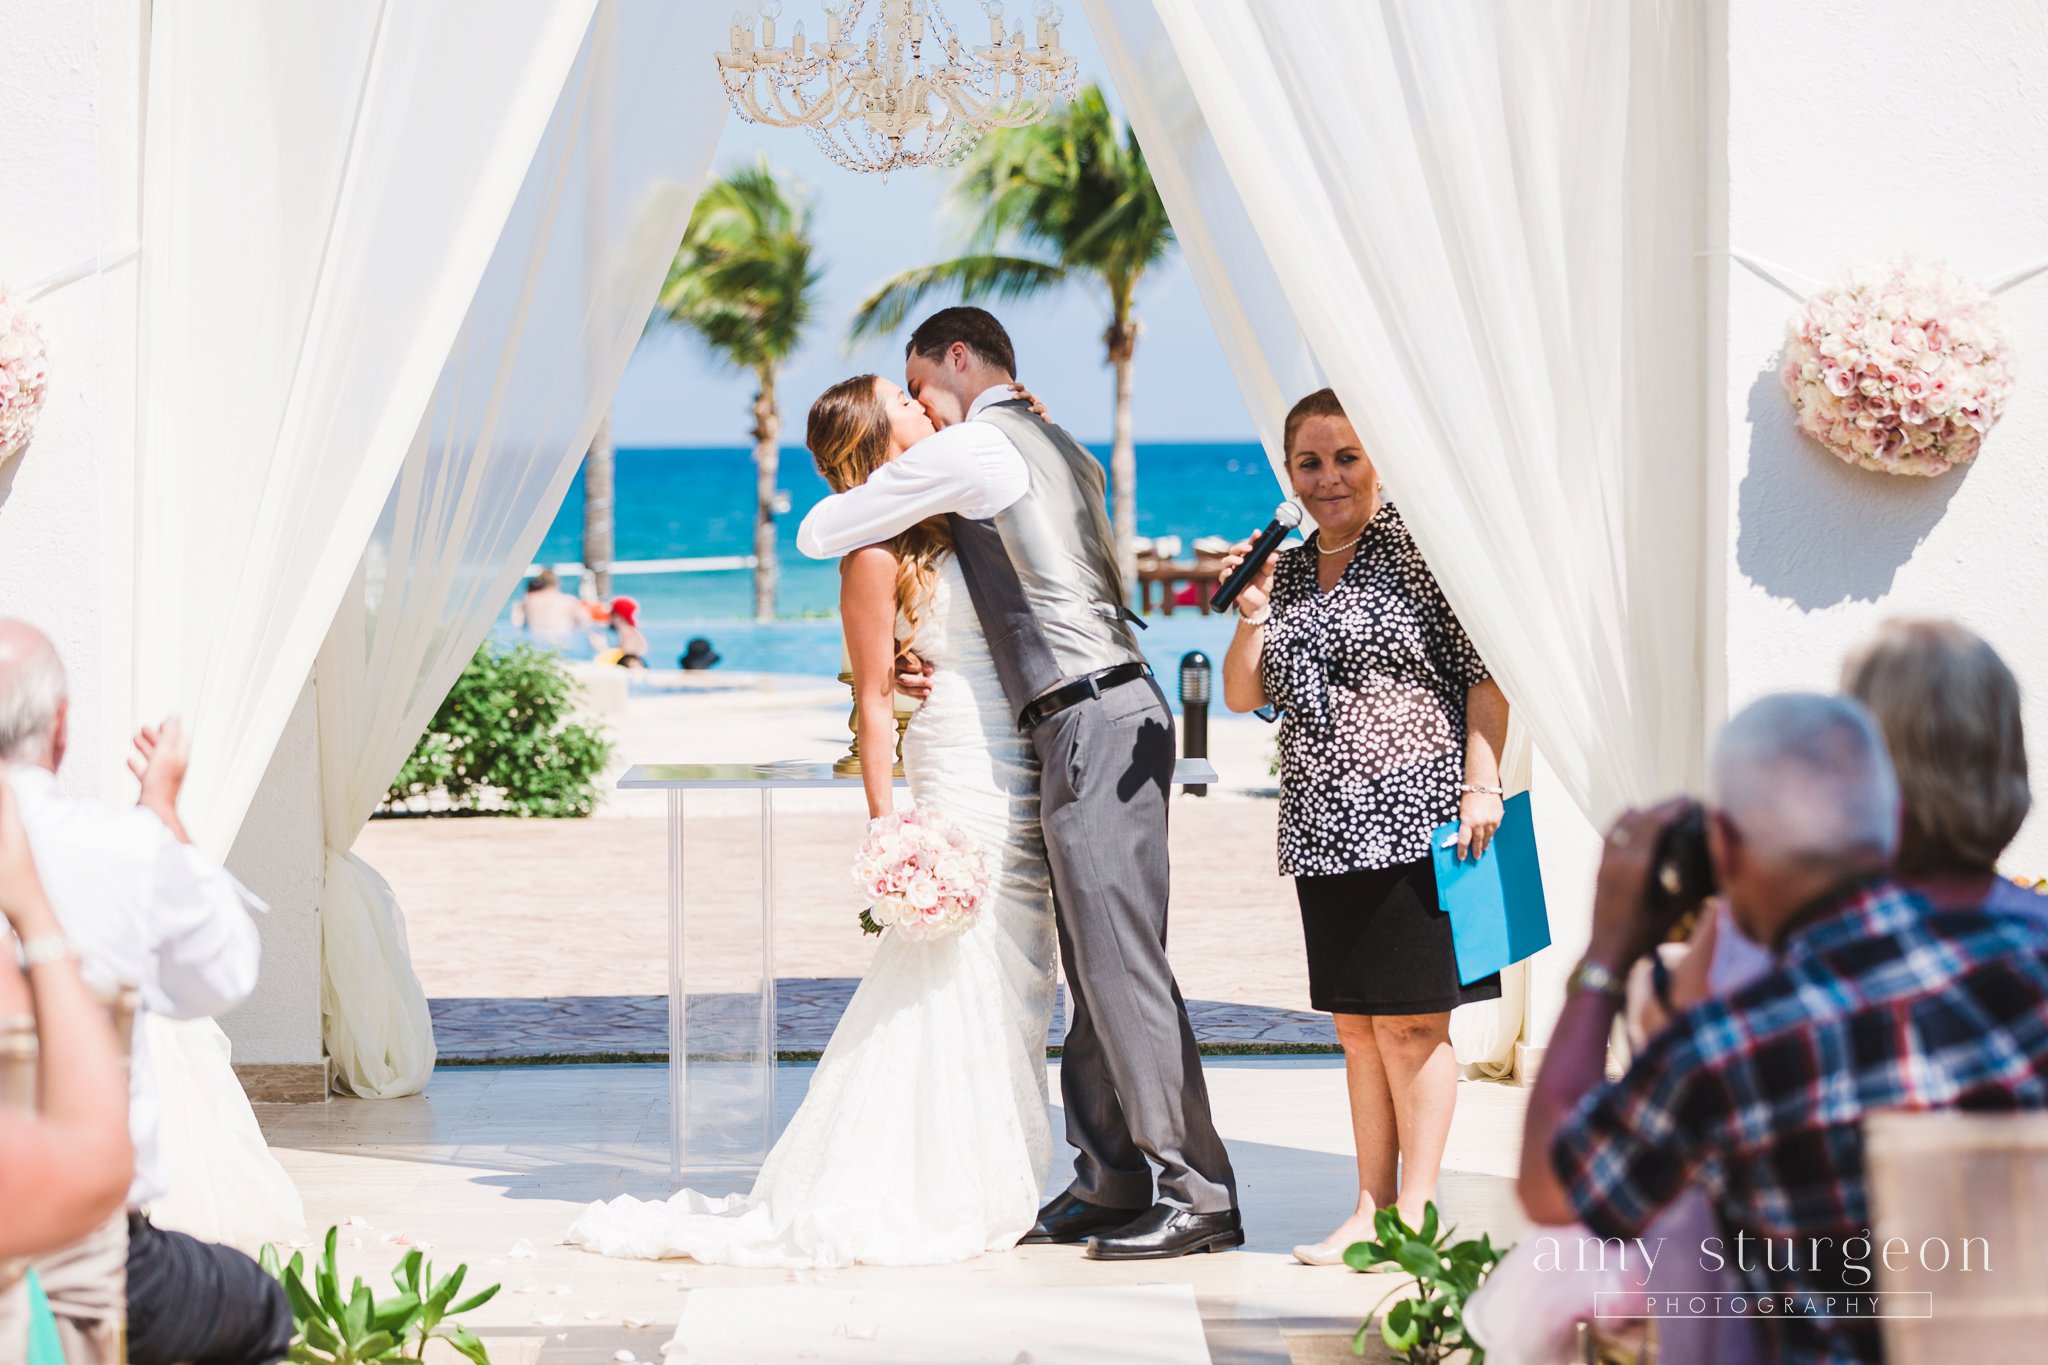 The first kiss at the Playa del carmen Mexico destination wedding